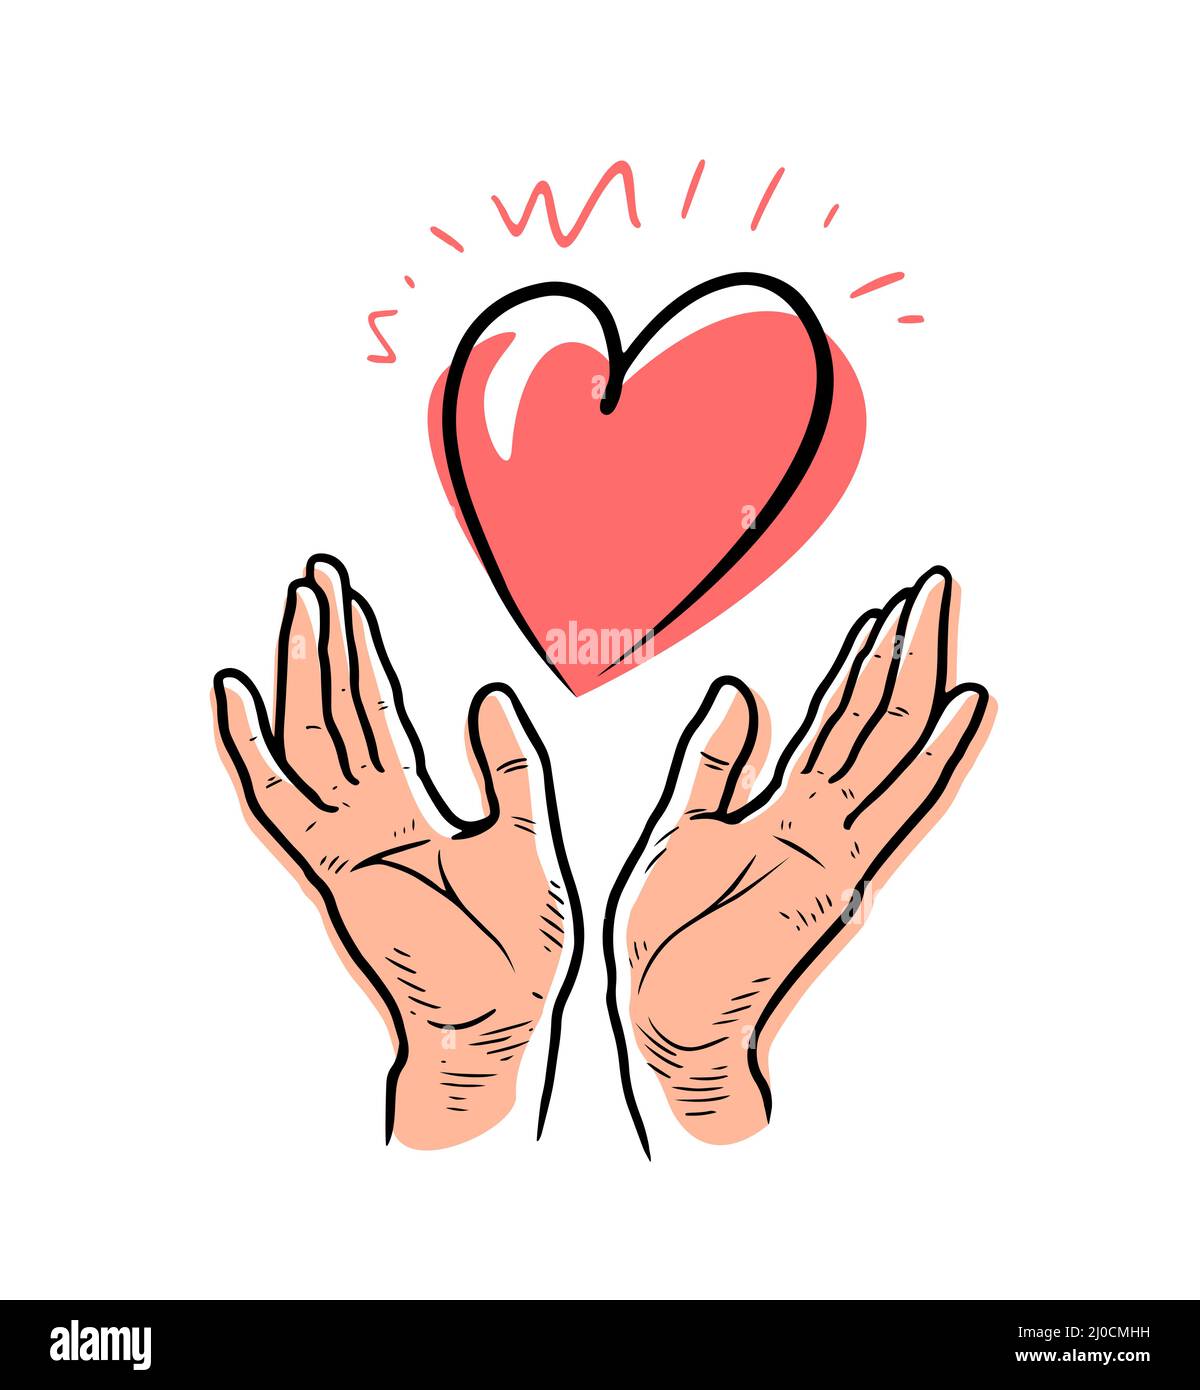 Heart and hands symbol. Valentines day concept. Hand drawn vector illustration Stock Vector